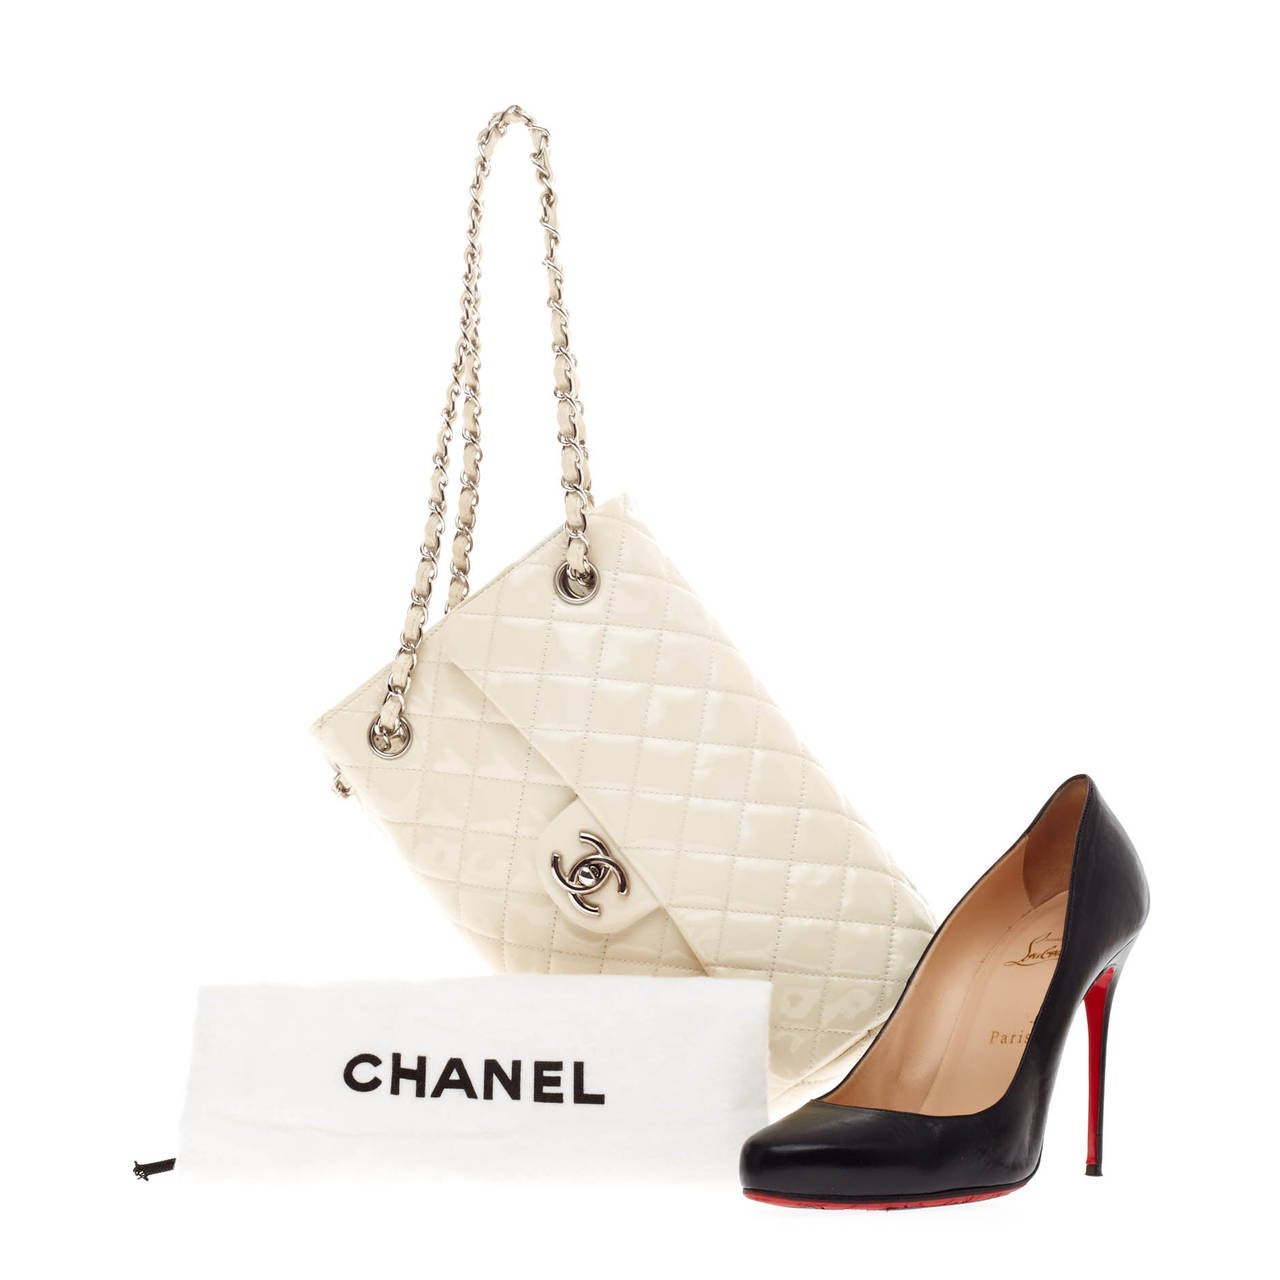 This authentic Chanel Upside Down Flap Bag Quilted Patent showcased in Chanel's Spring 2009 collection is designed as classic flap bag with a whimsical twist. Crafted from shiny white patent leather, the bag's leather woven-in straps are turned on